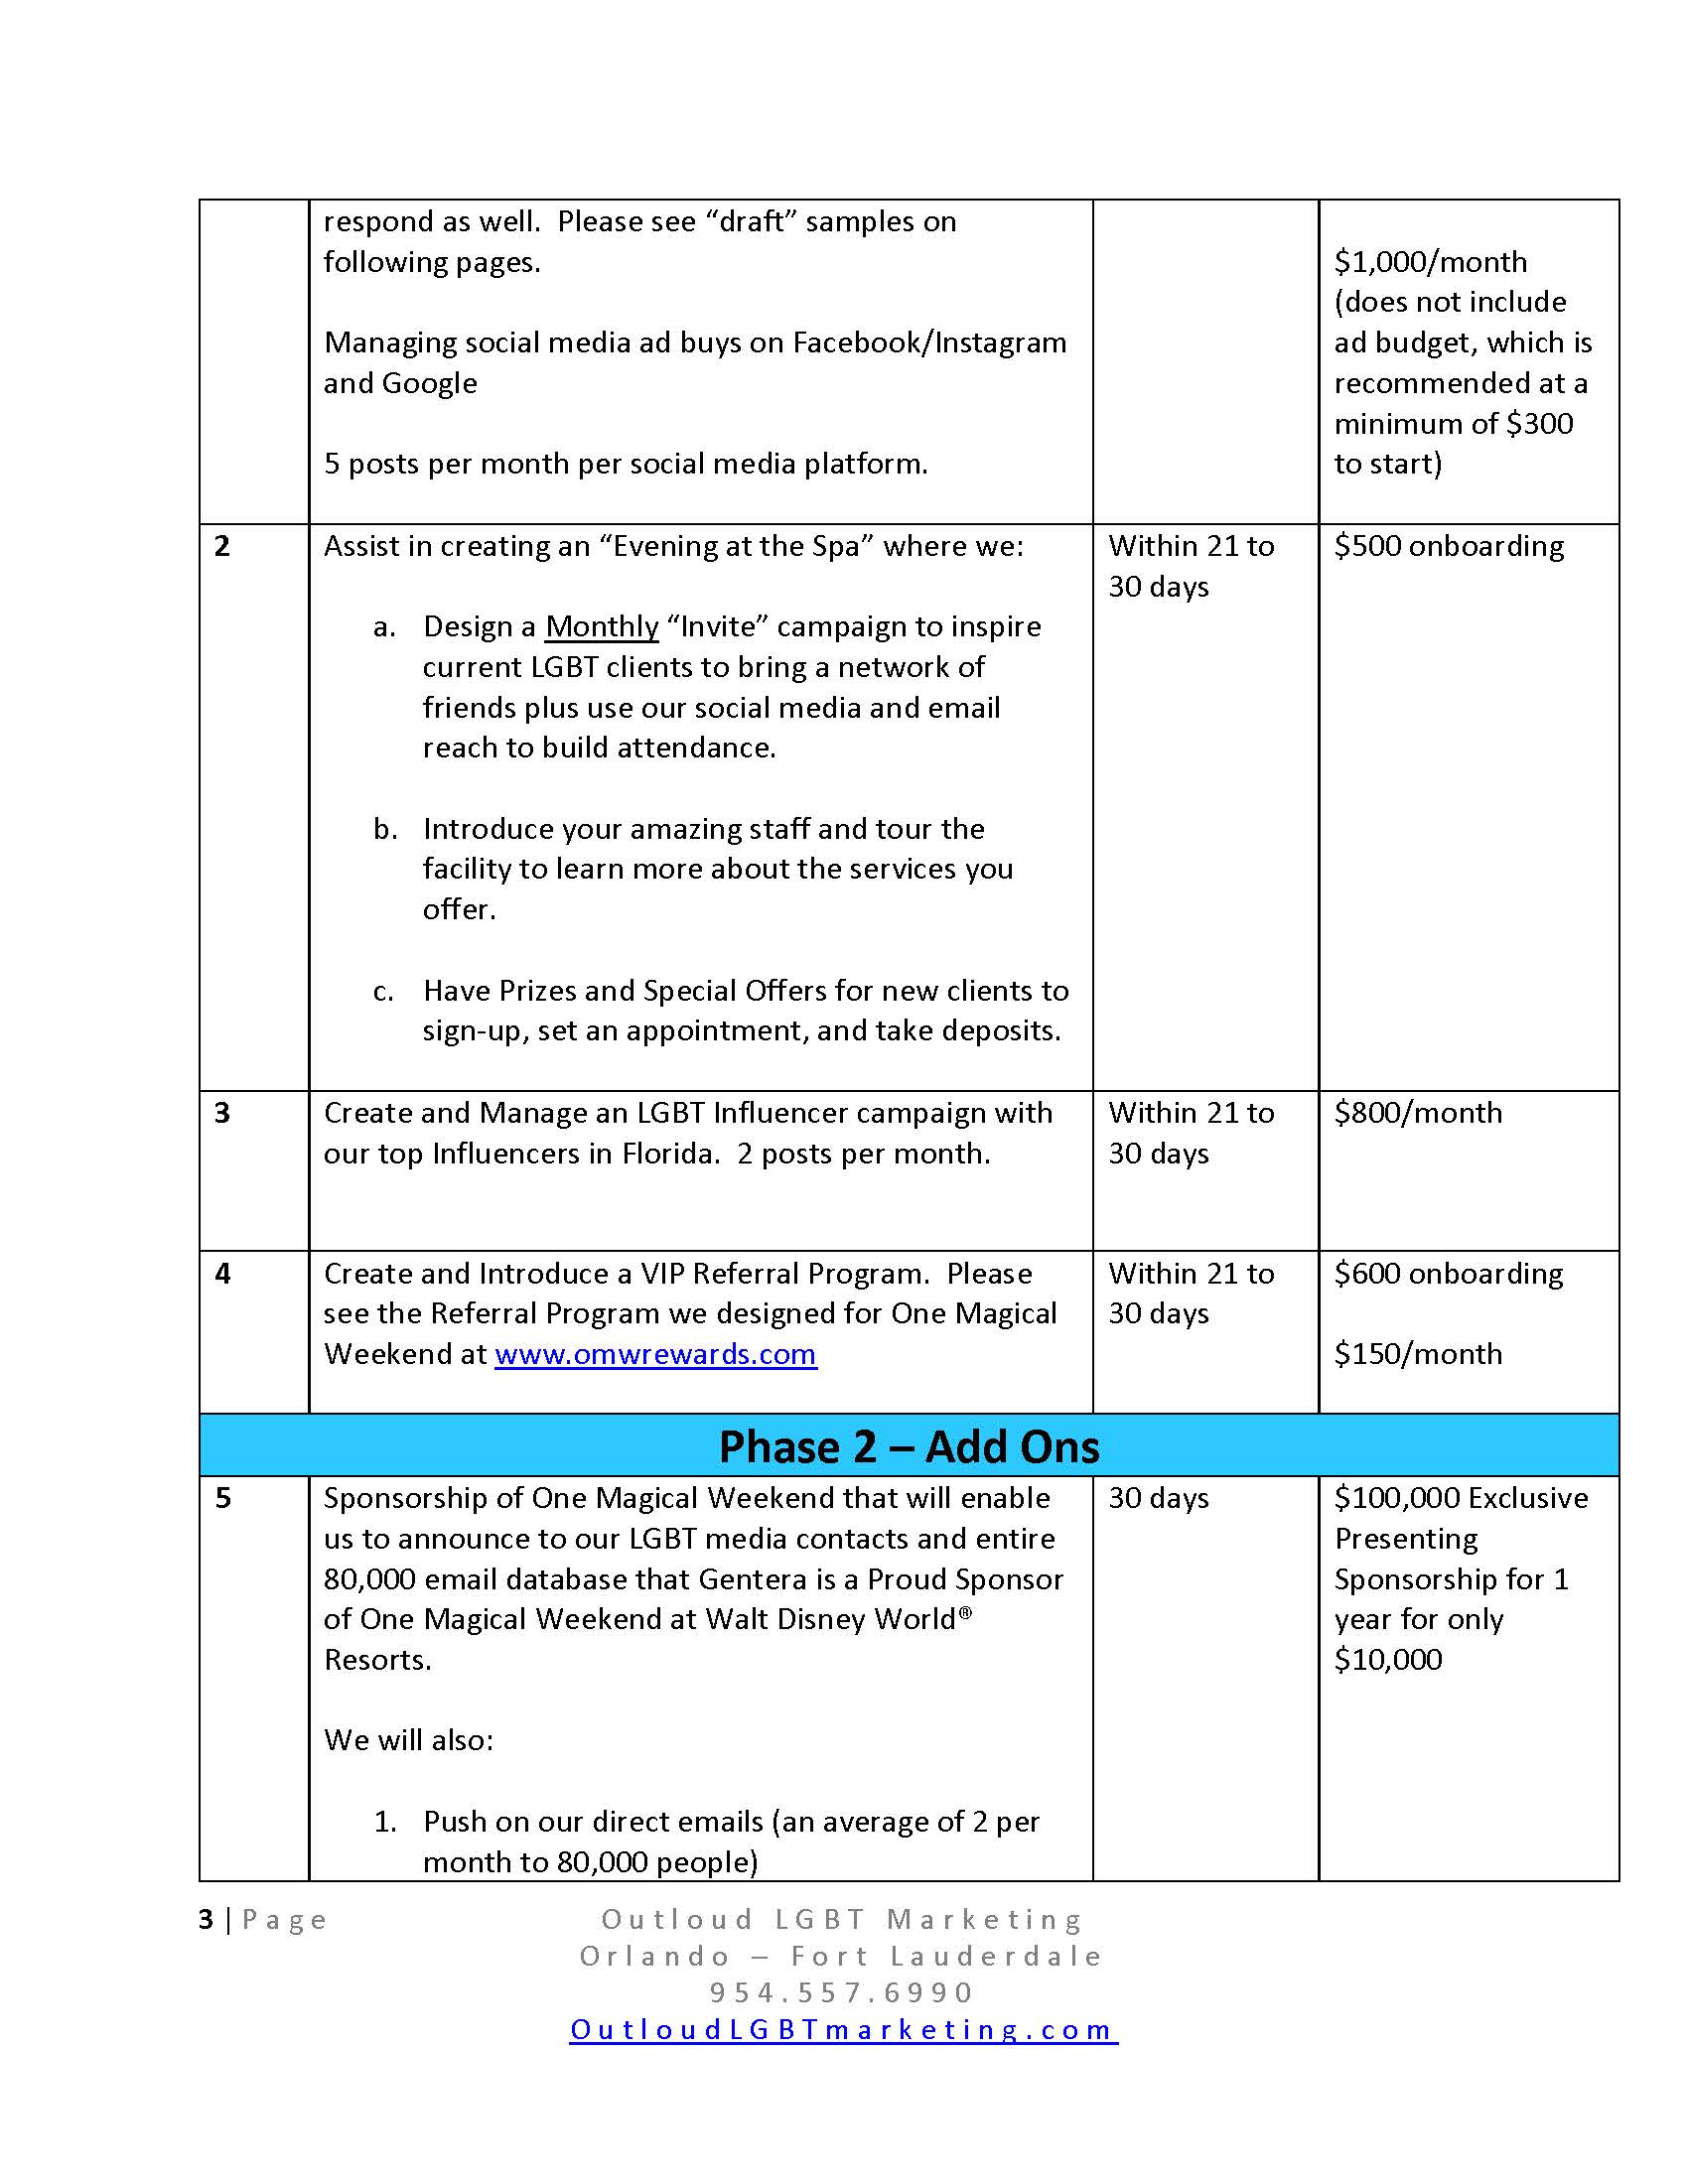 Outloud LGBT Marketing Proposal for GenteraMed as fo 10-06-19_Page_3